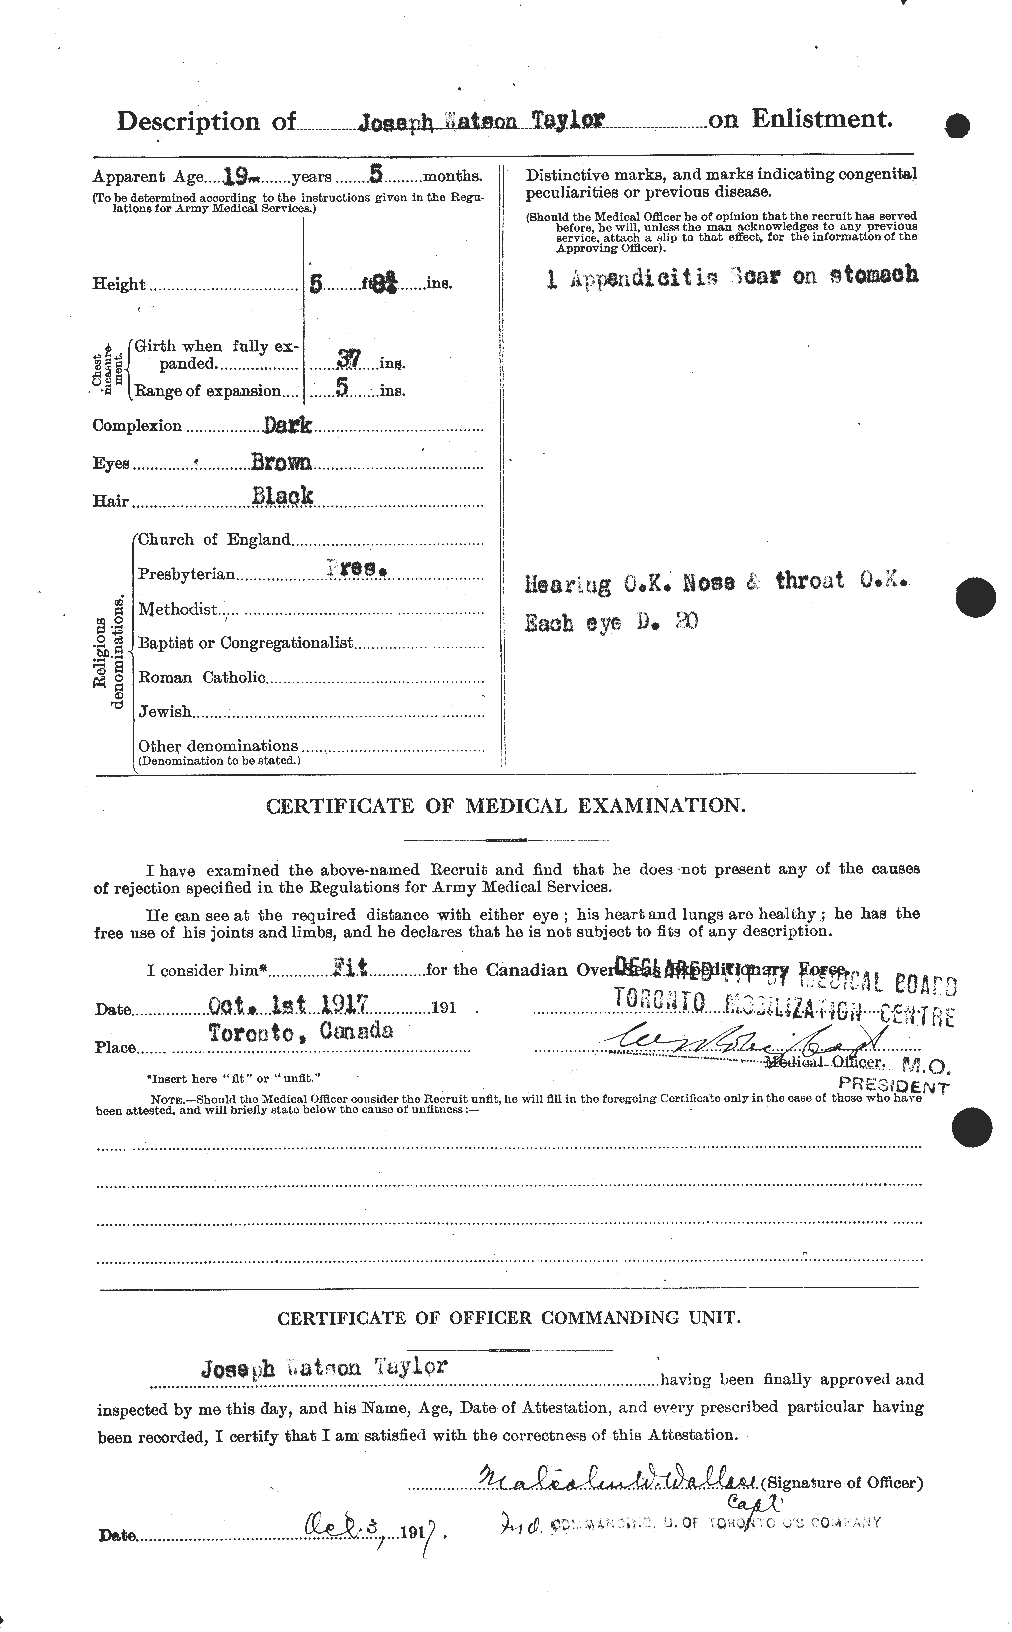 Personnel Records of the First World War - CEF 627588b